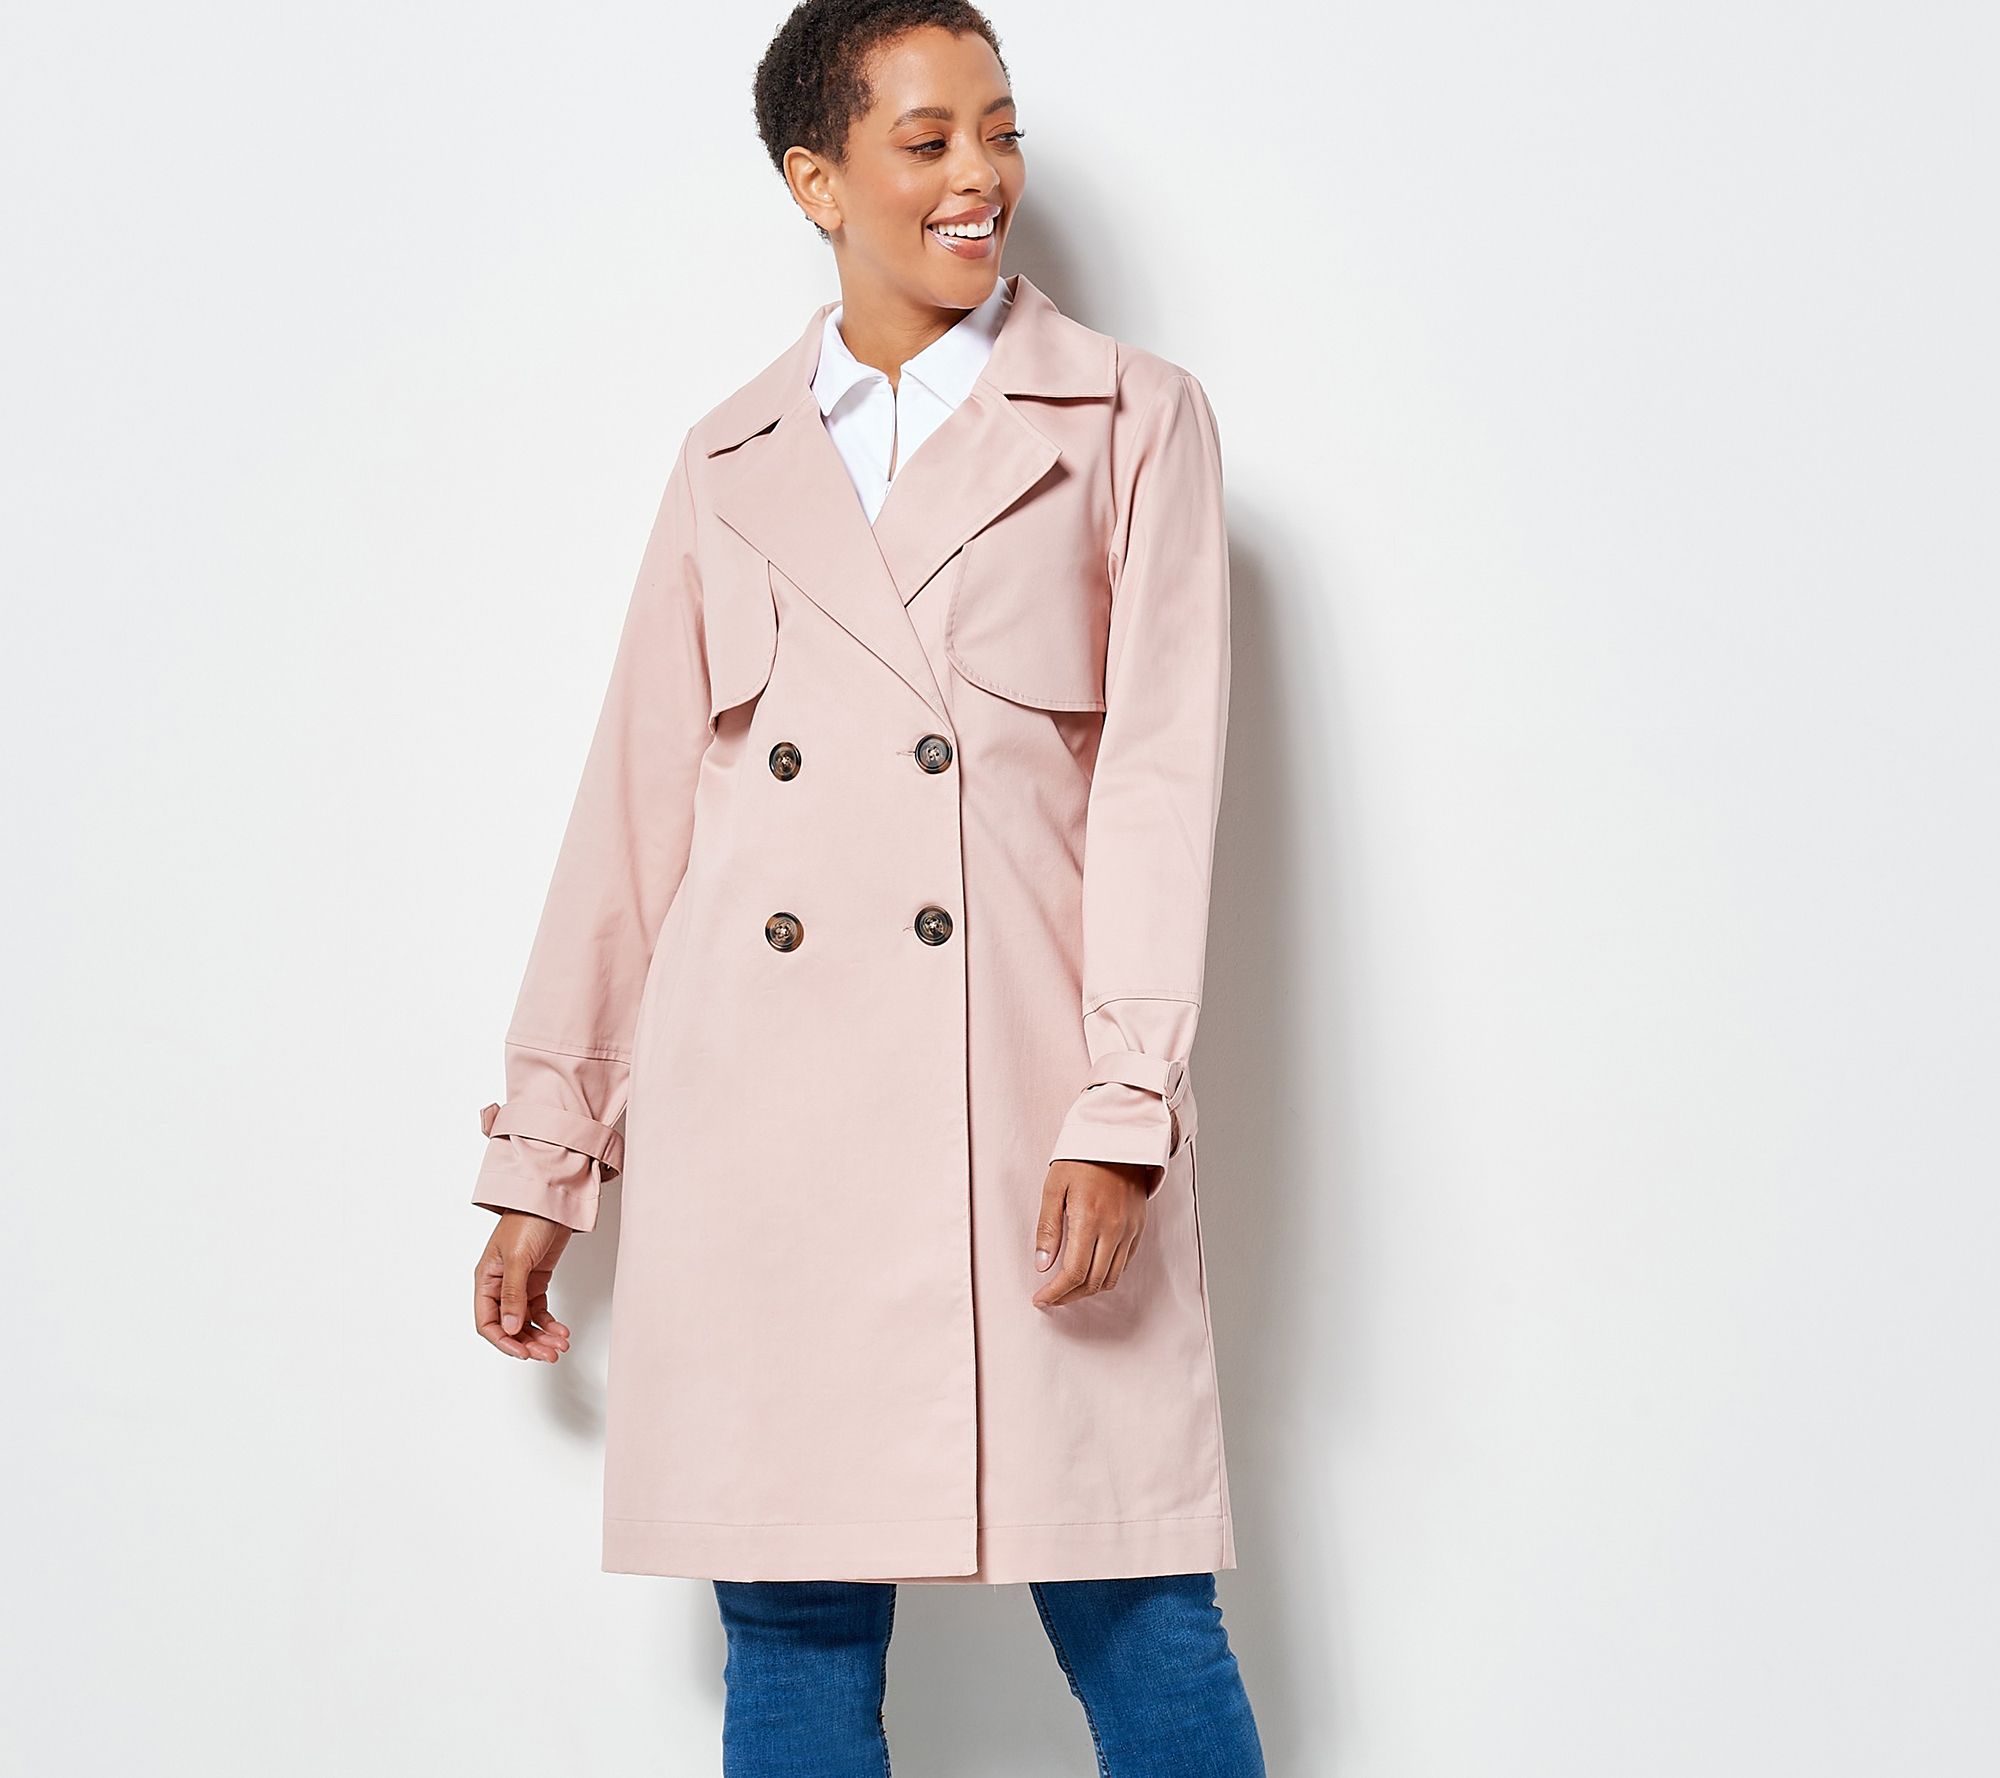 Centigrade Twill Double Breasted Long Trench Coat - QVC.com